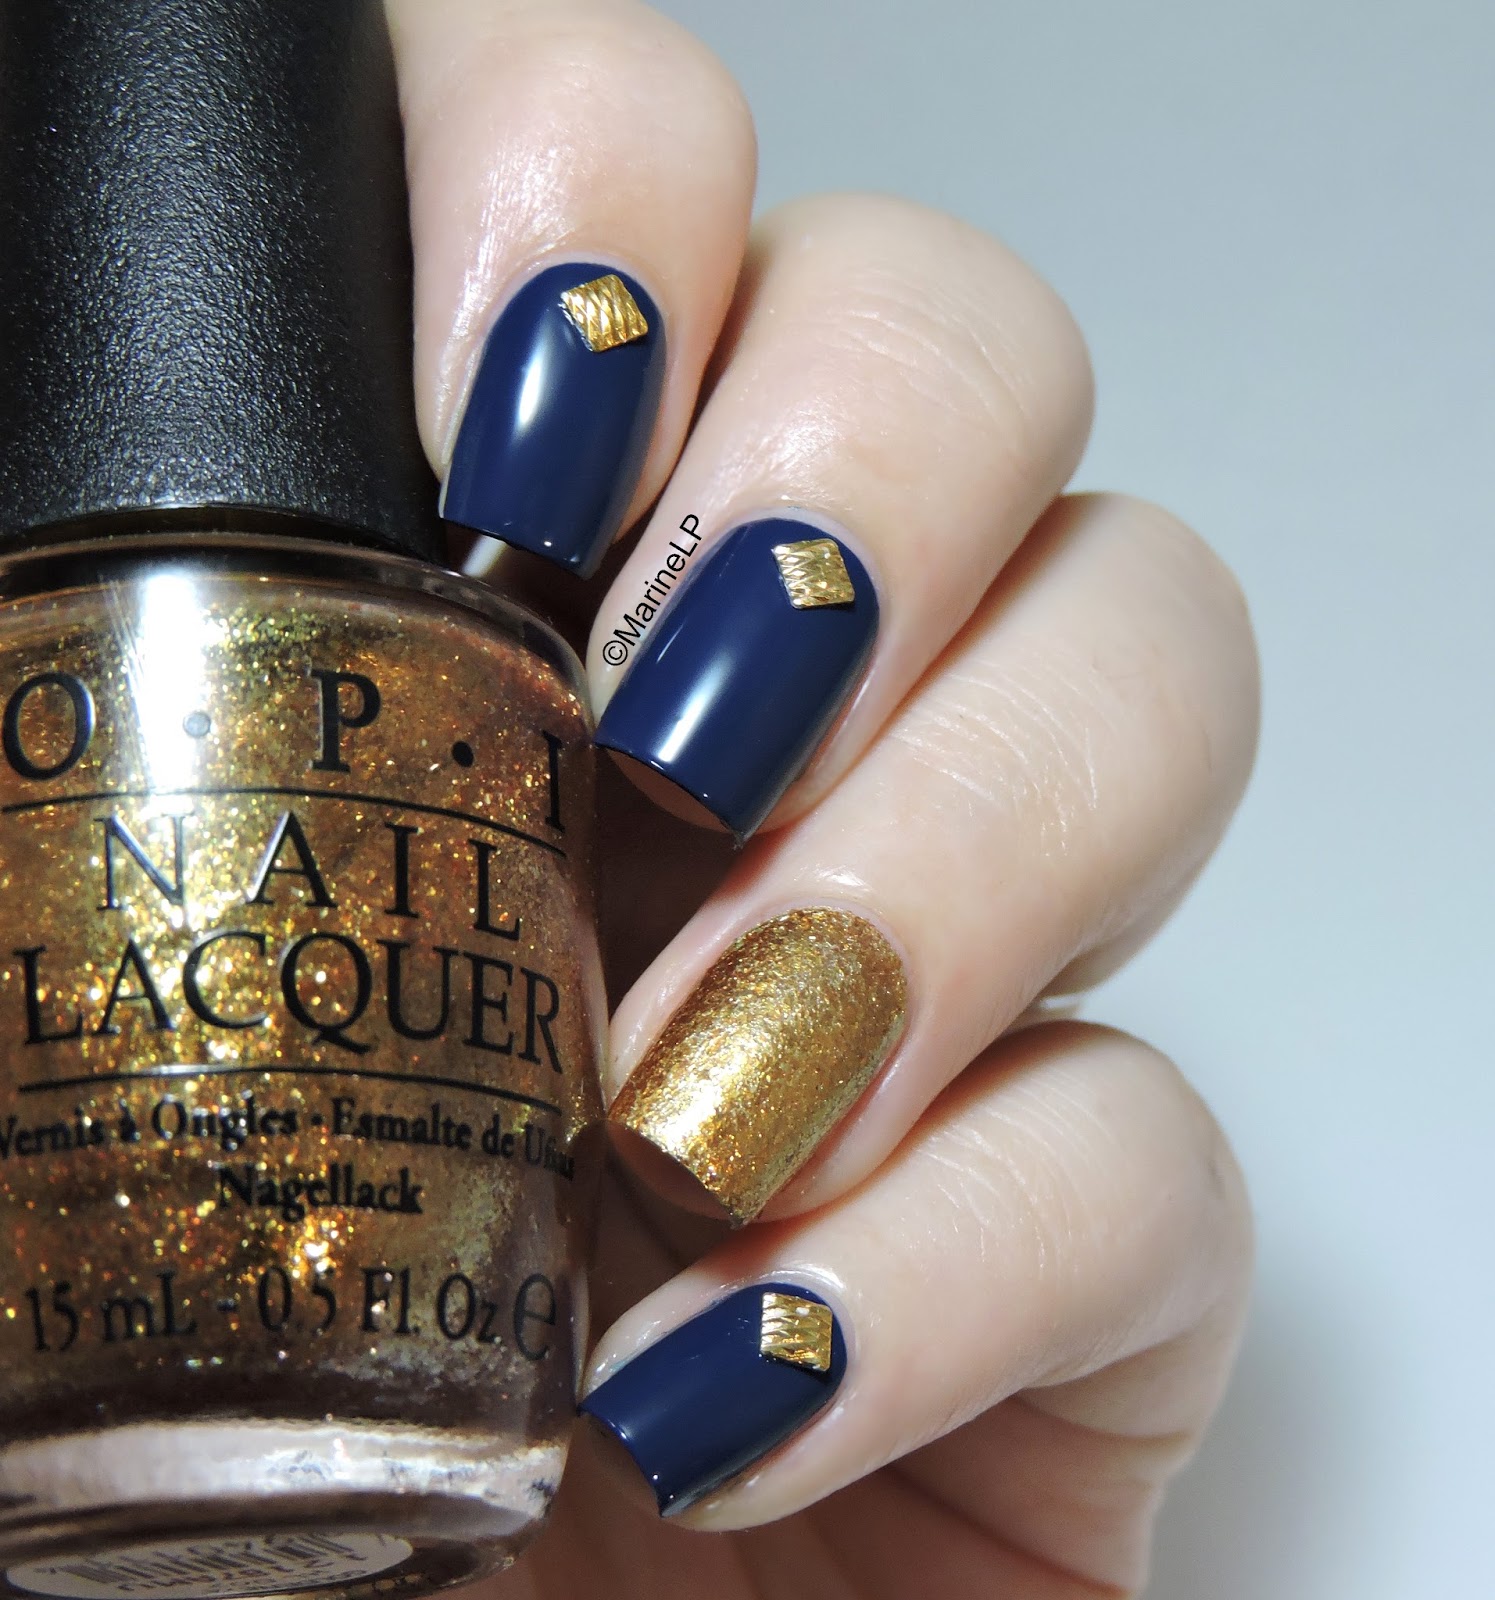 Blue and gold studded mani.